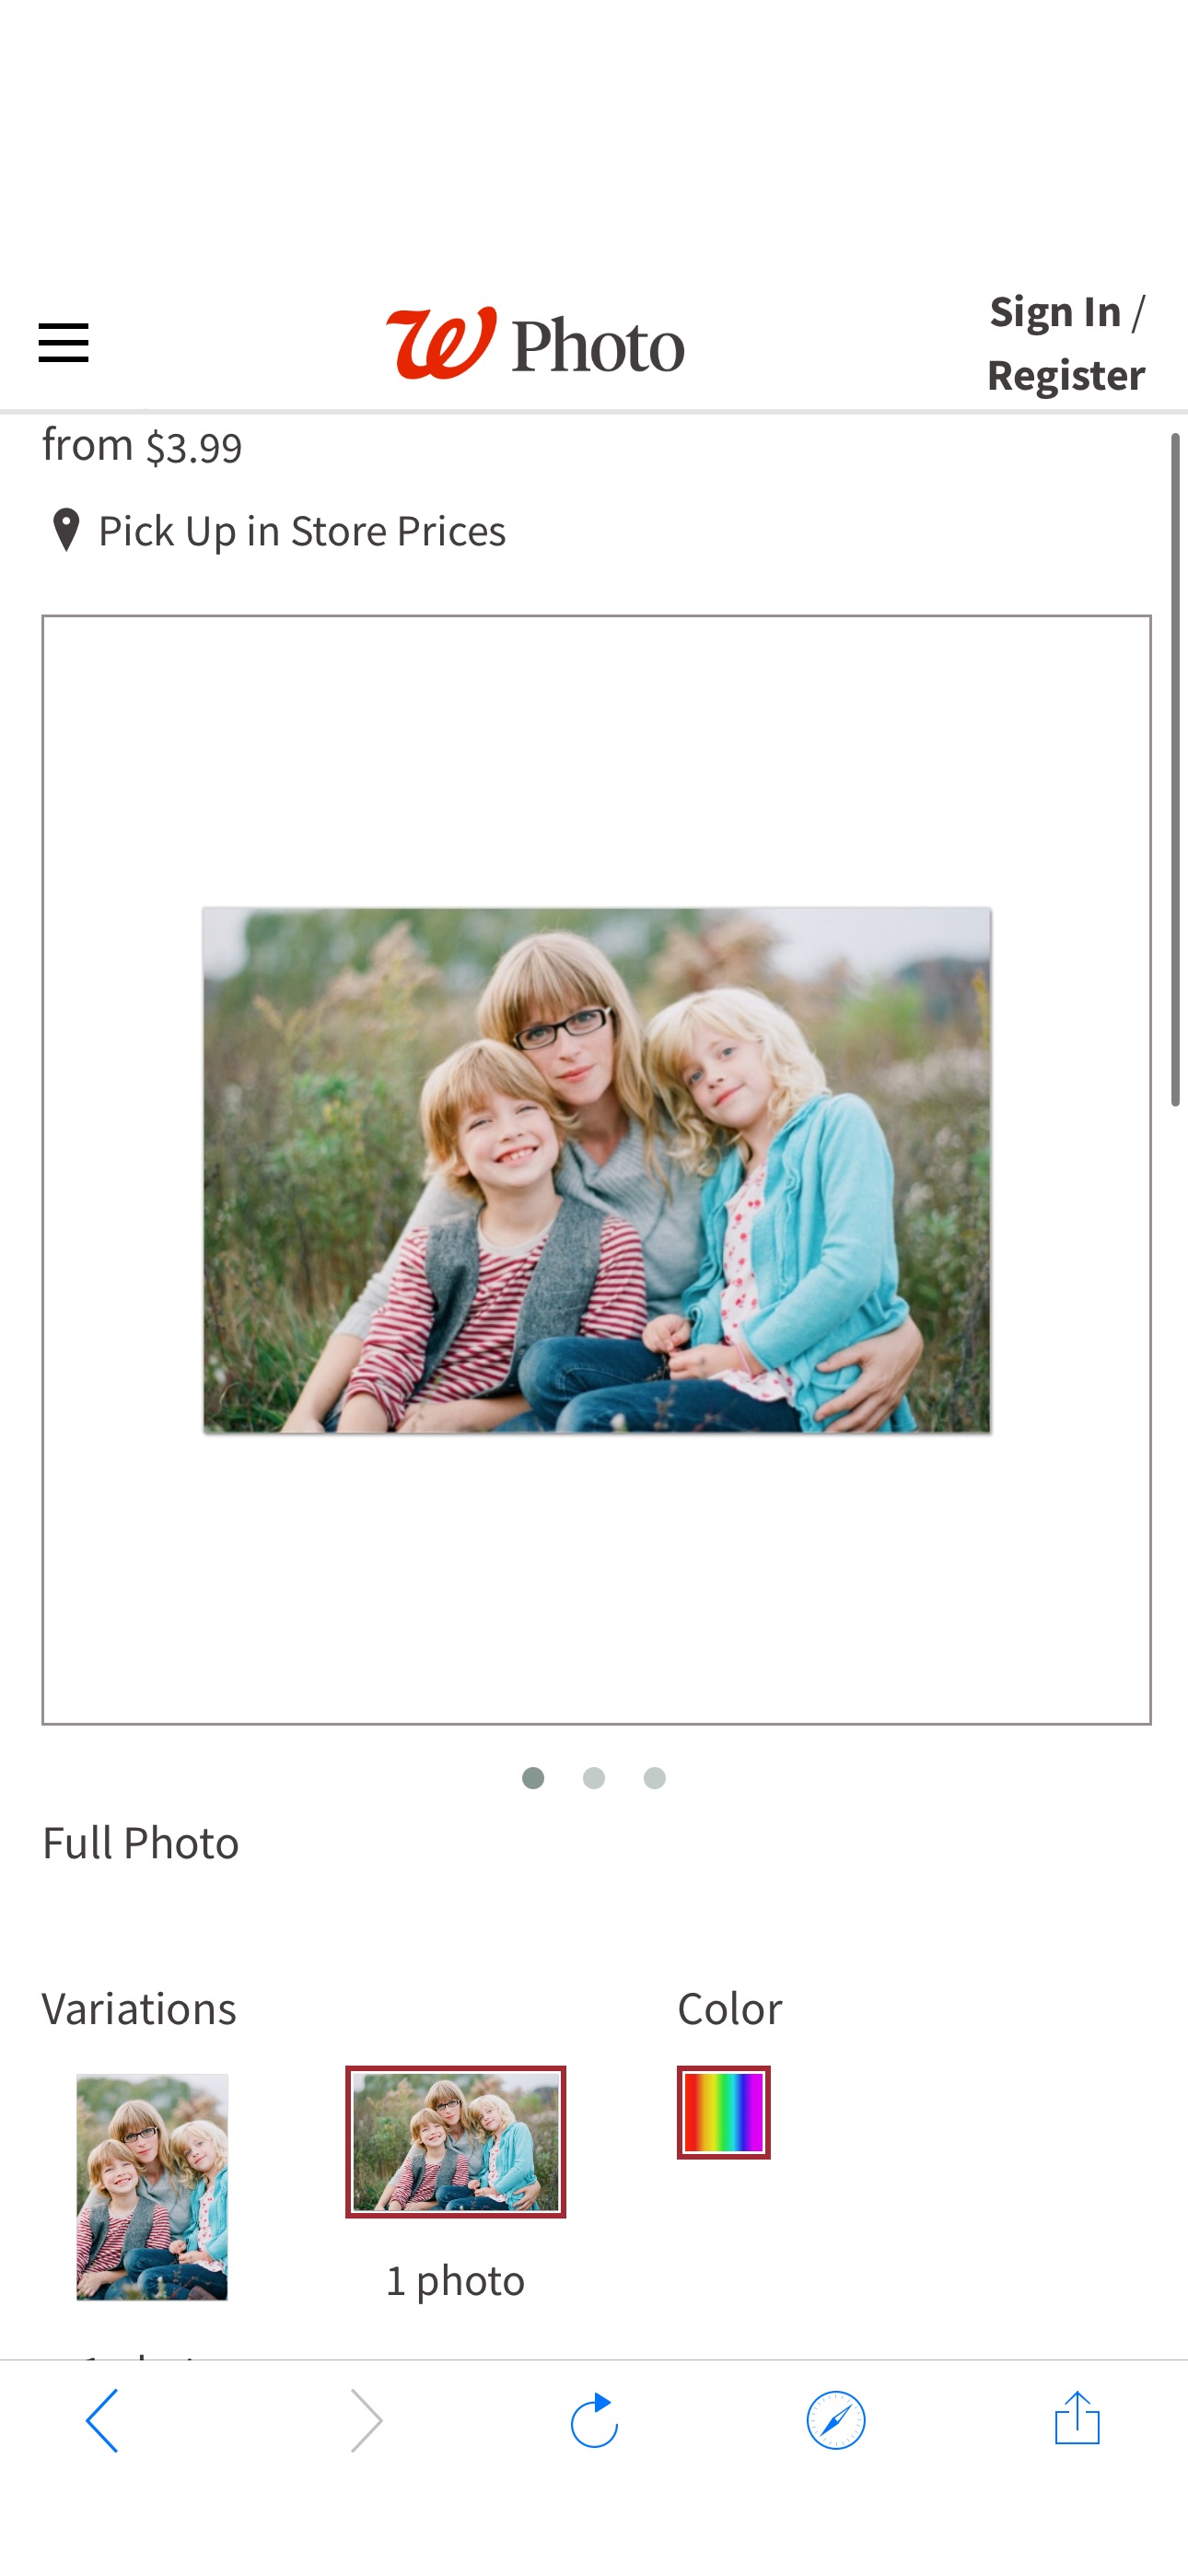 4x6 Photo Magnets | 5x7 Magnet | Home Gifts | Gifts | Walgreens Photo 4x6 Photo Magnet $0.79
Use code MAGNET79